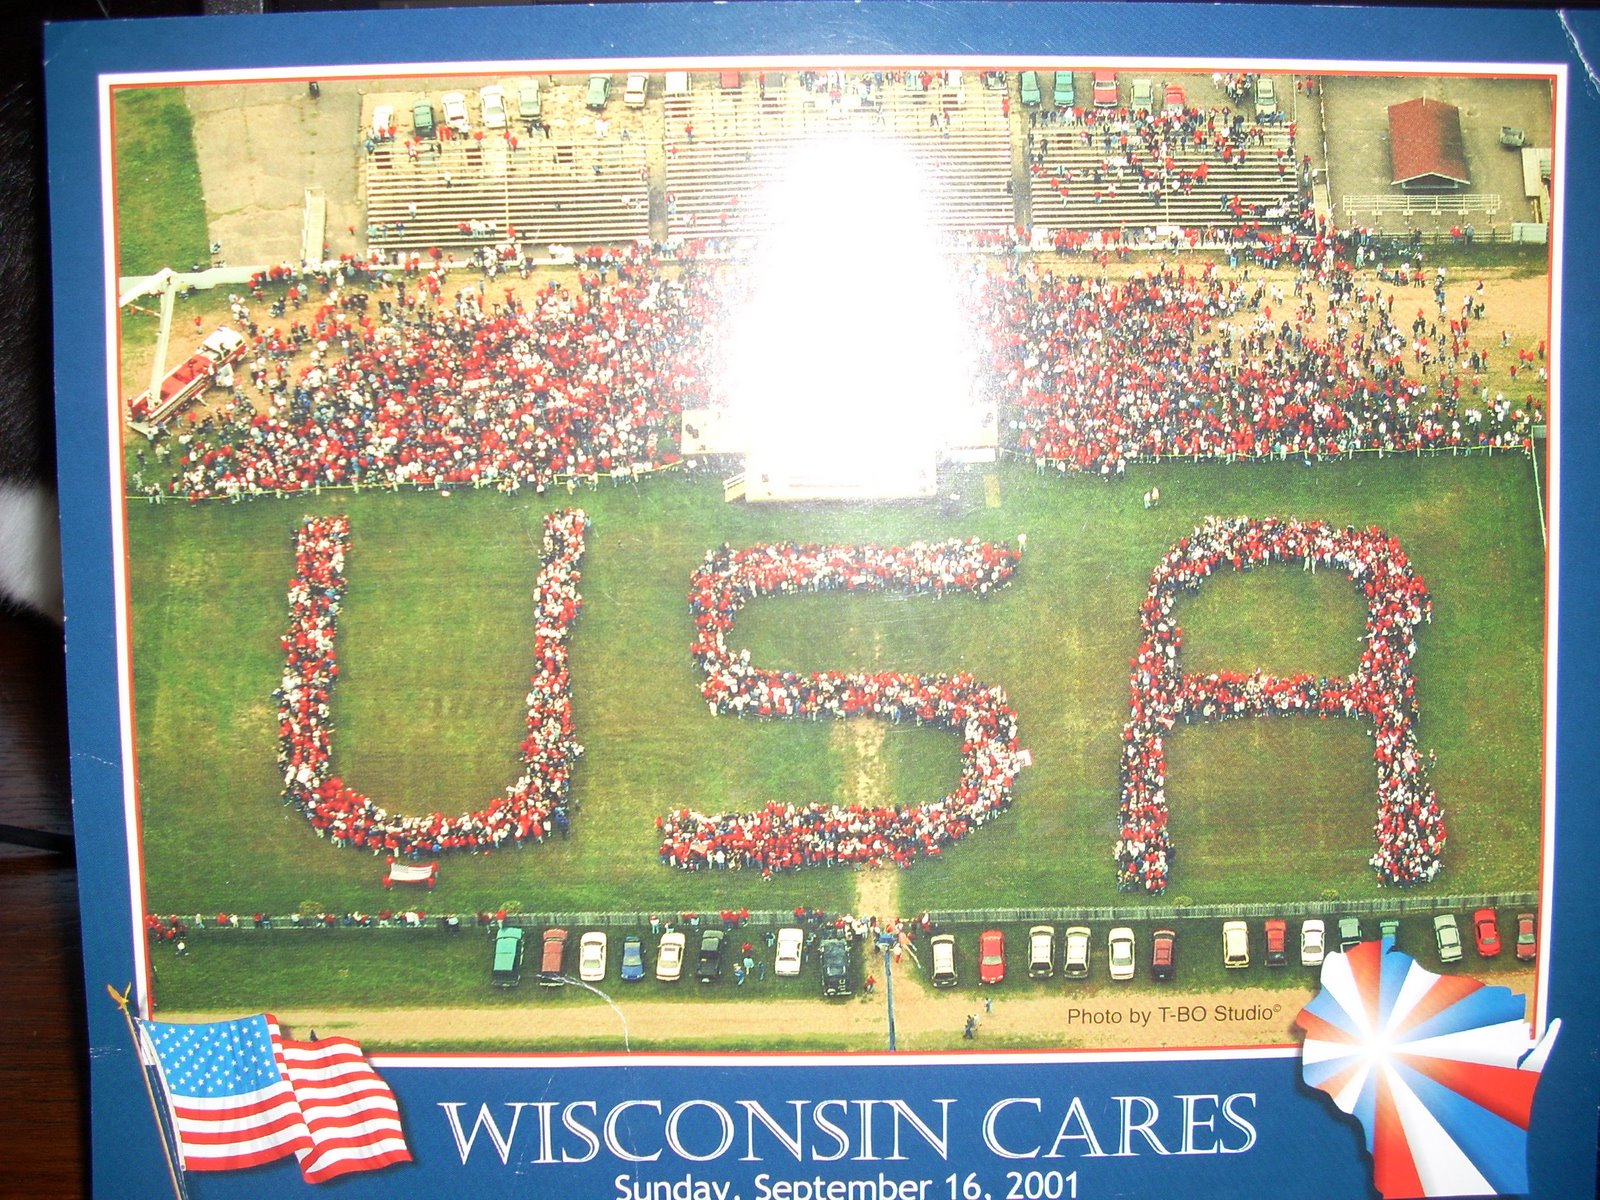 [Wisconsin+Cares+Sept.+16,+2001+We+are+in+the+left+side+of+the+U+(1).jpg]